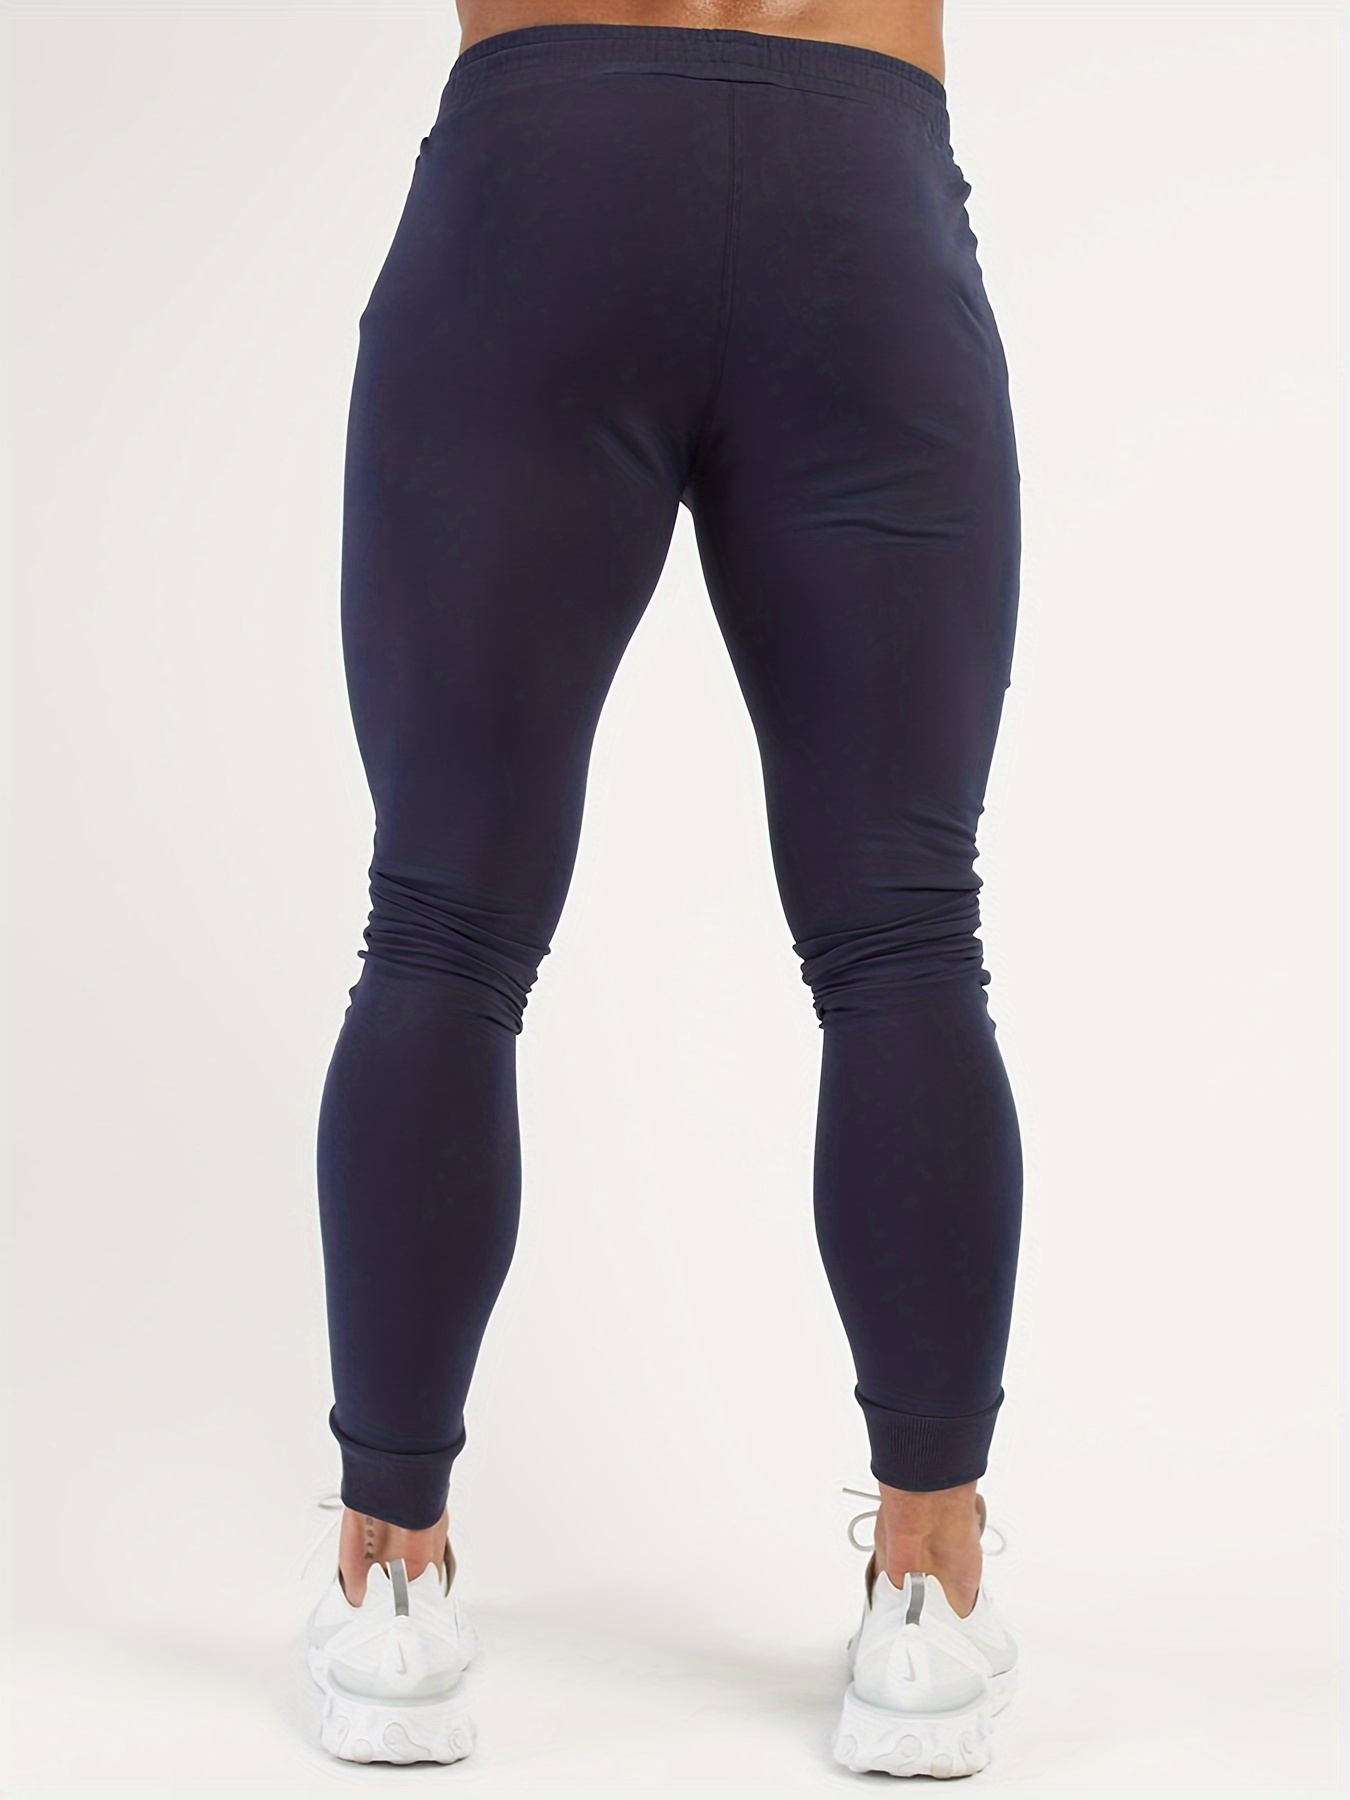 Spring Autumn Women Running Tights GYM Pocket Pants Male